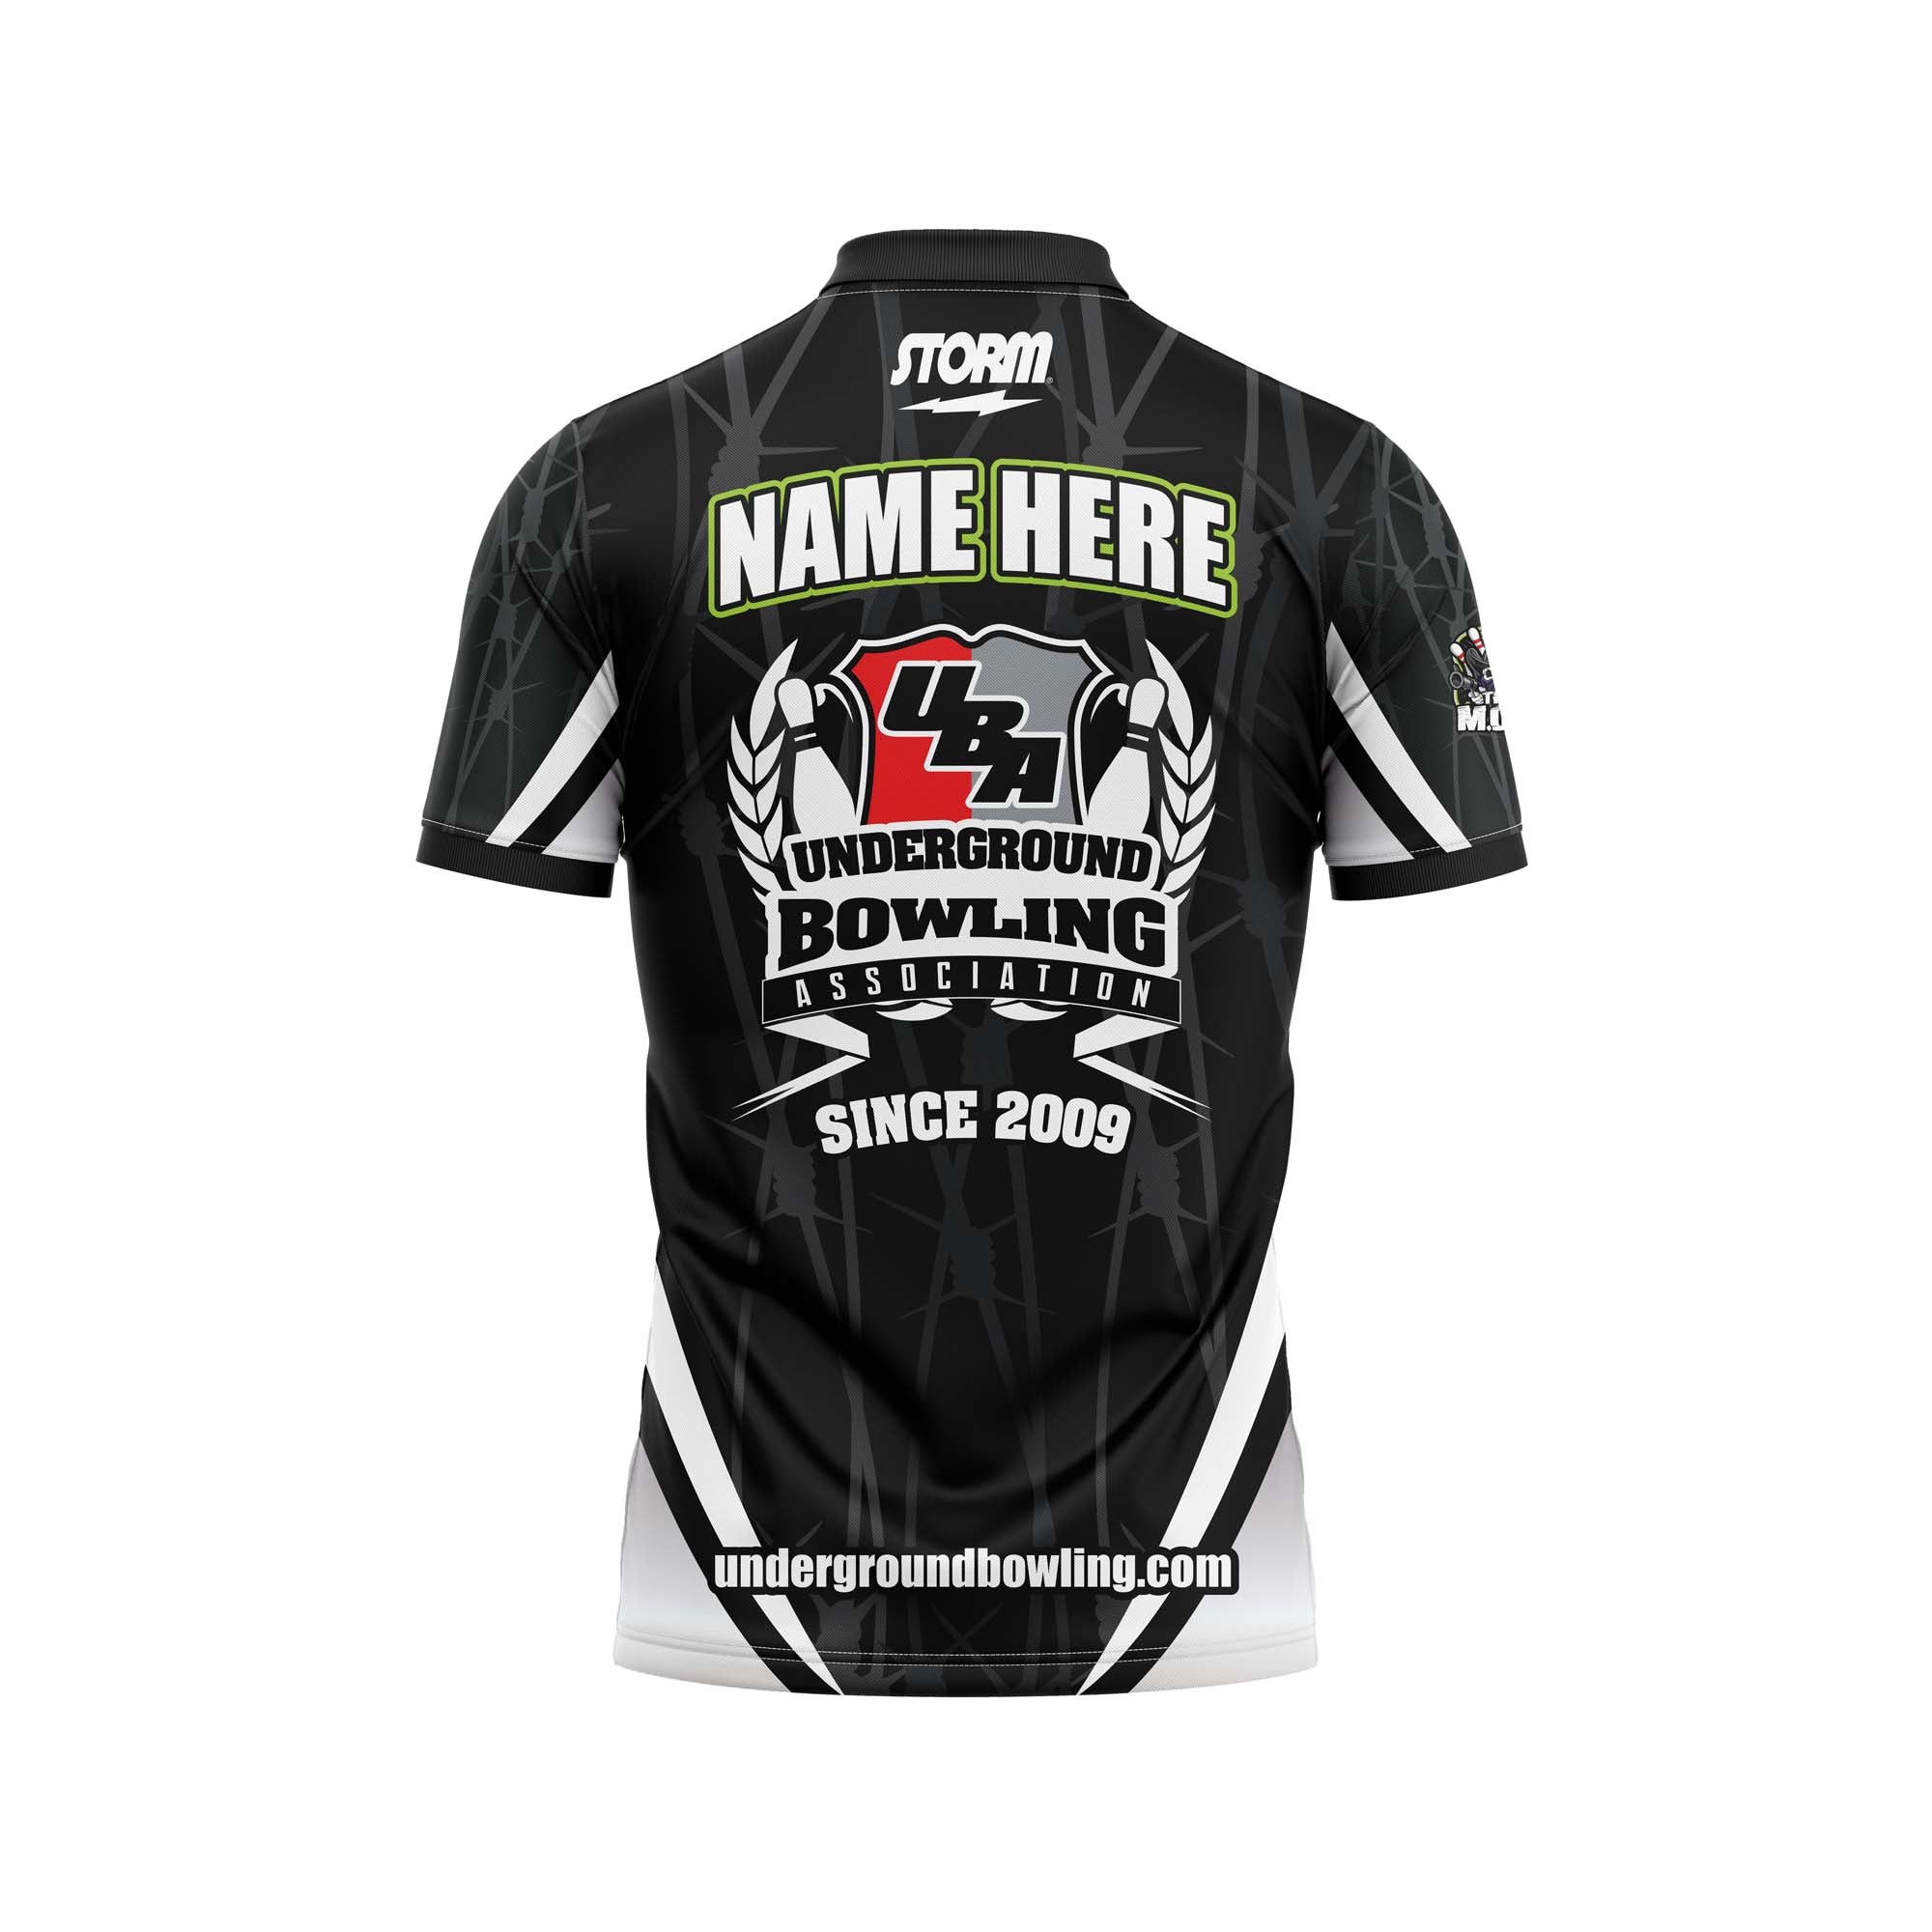 The MOB Black Jersey